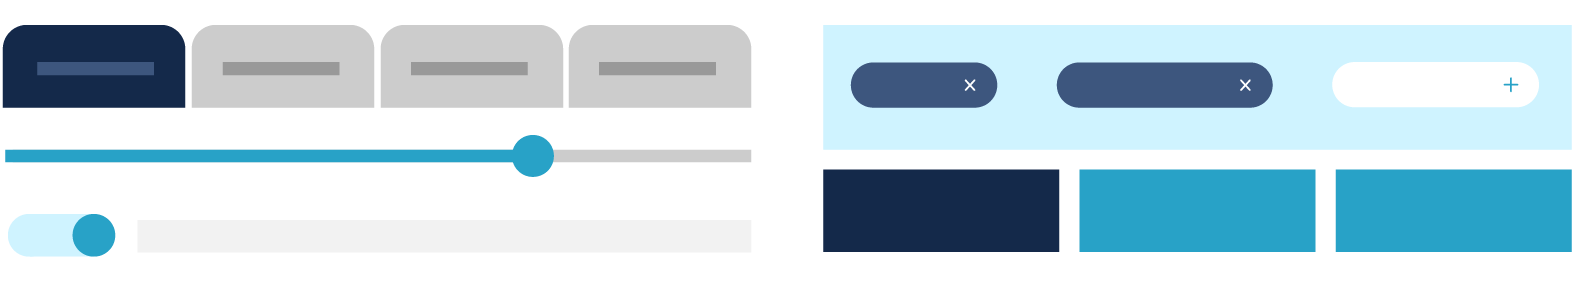 Graphic of digital interface elements